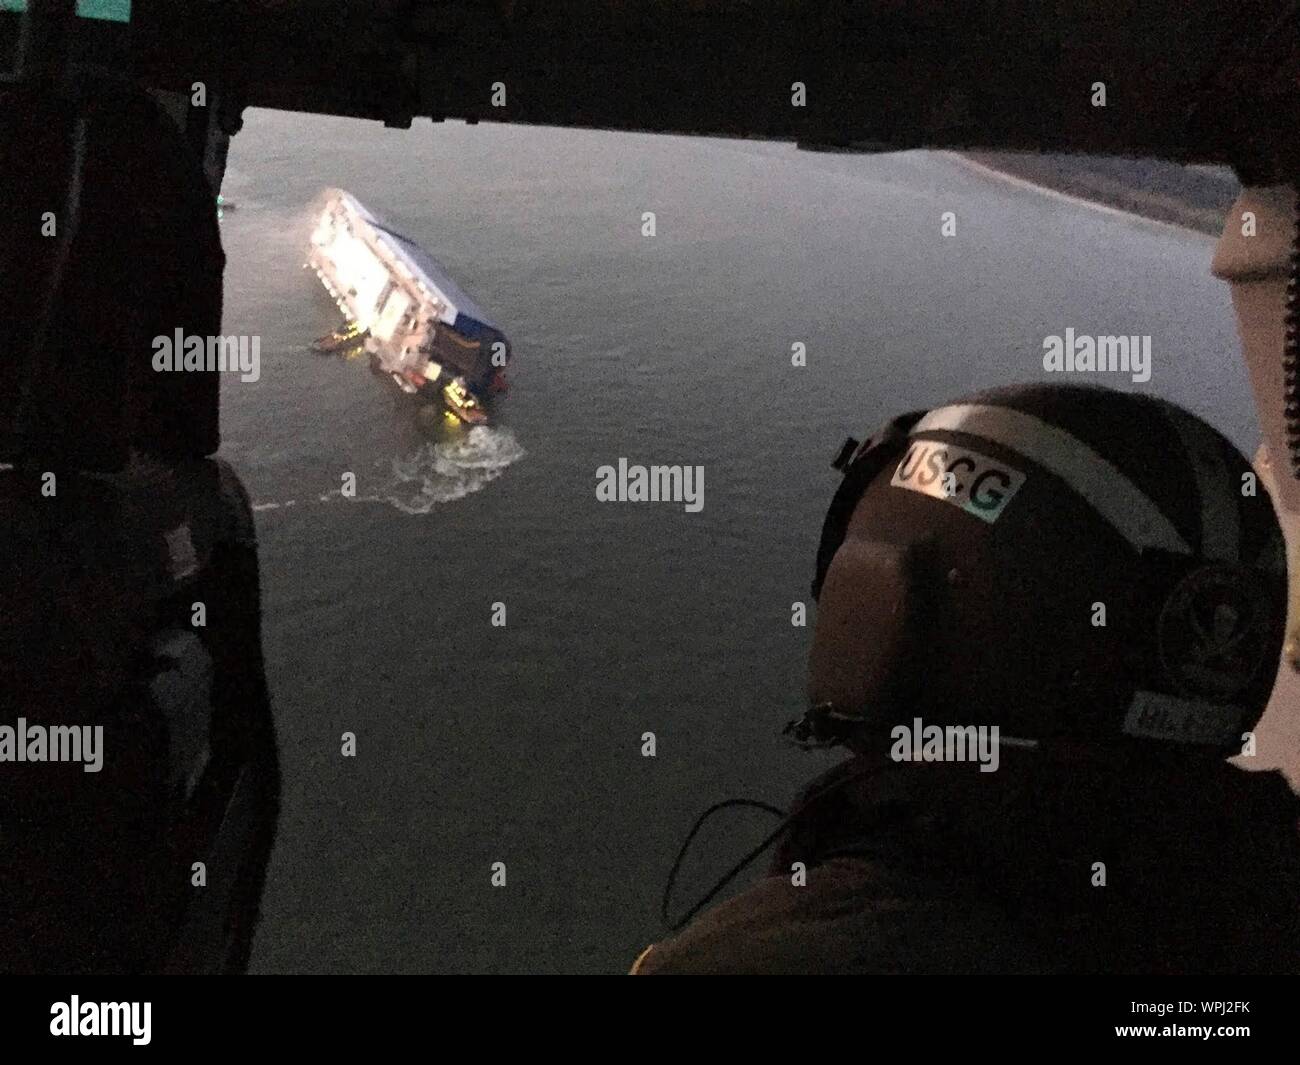 St Simons Island, Georgia, USA. 08 September, 2019. Aerial view from a U.S. Coast Guard rescue helicopter showing the M/V Golden Ray cargo ship as it rests inverted in the water after suffering a fire and capsizing in St Simons Sound Aerial September 8, 2019 off St Simons, Georgia, USA. The 656-foot-long vehicle carrier, listing heavily after suffering a fire with 24 crew members aboard.  Credit: U.S Coast Guard/Alamy Live News Stock Photo